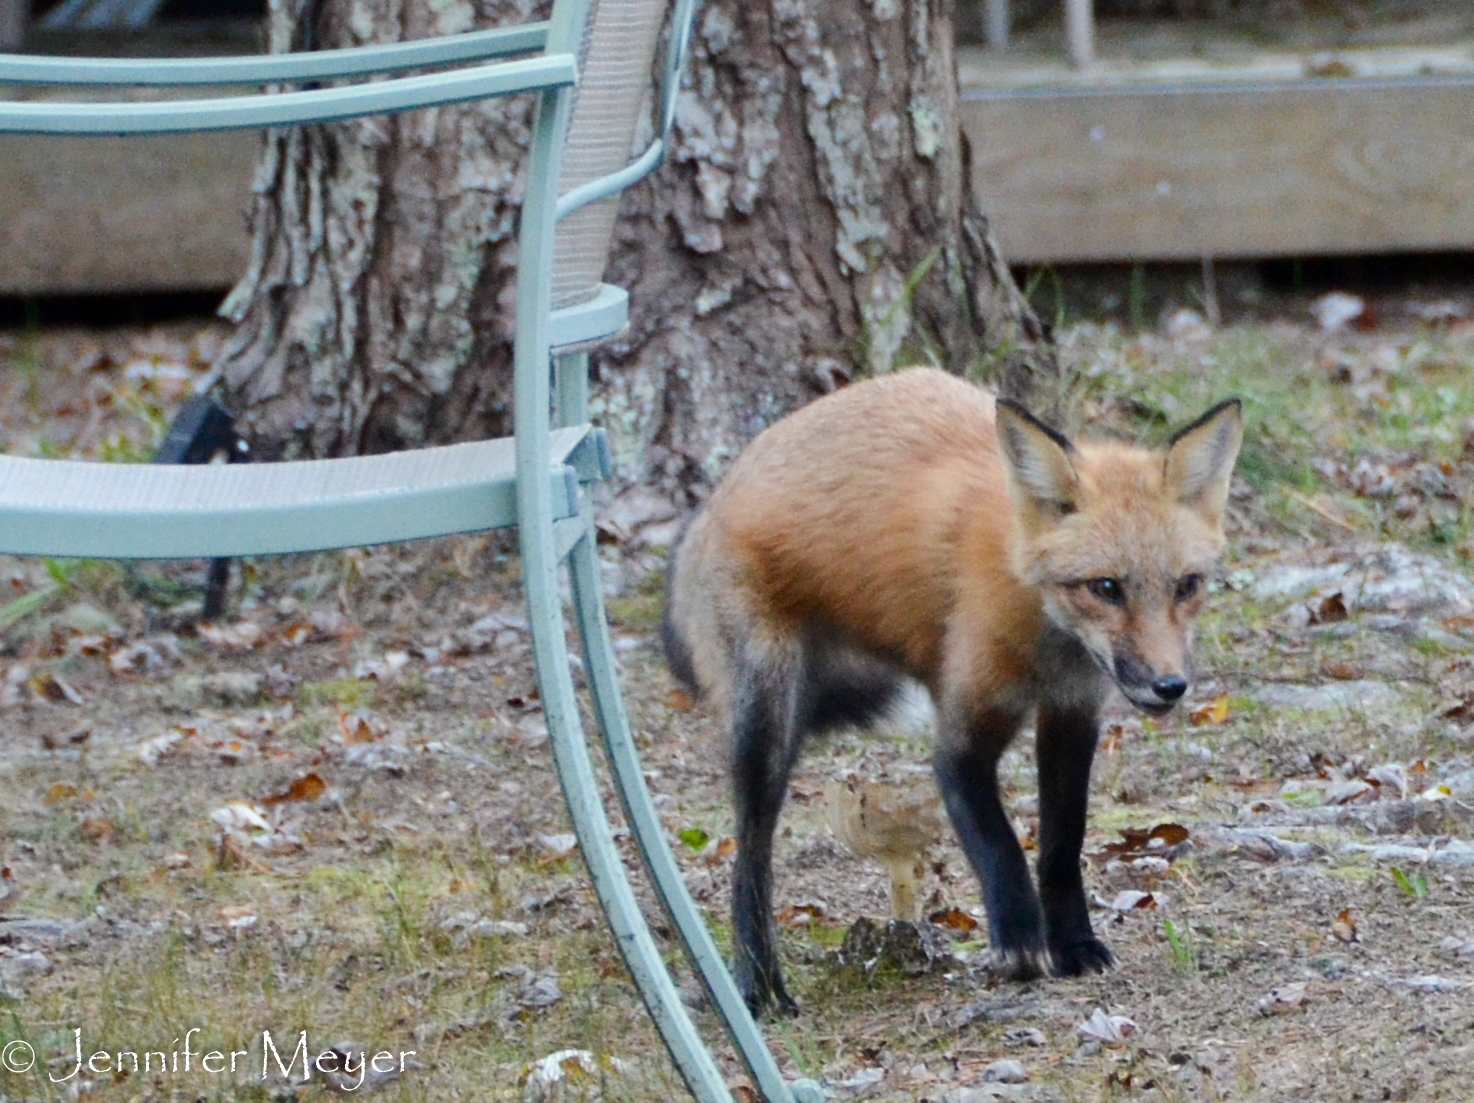 And saw this little fox run by.